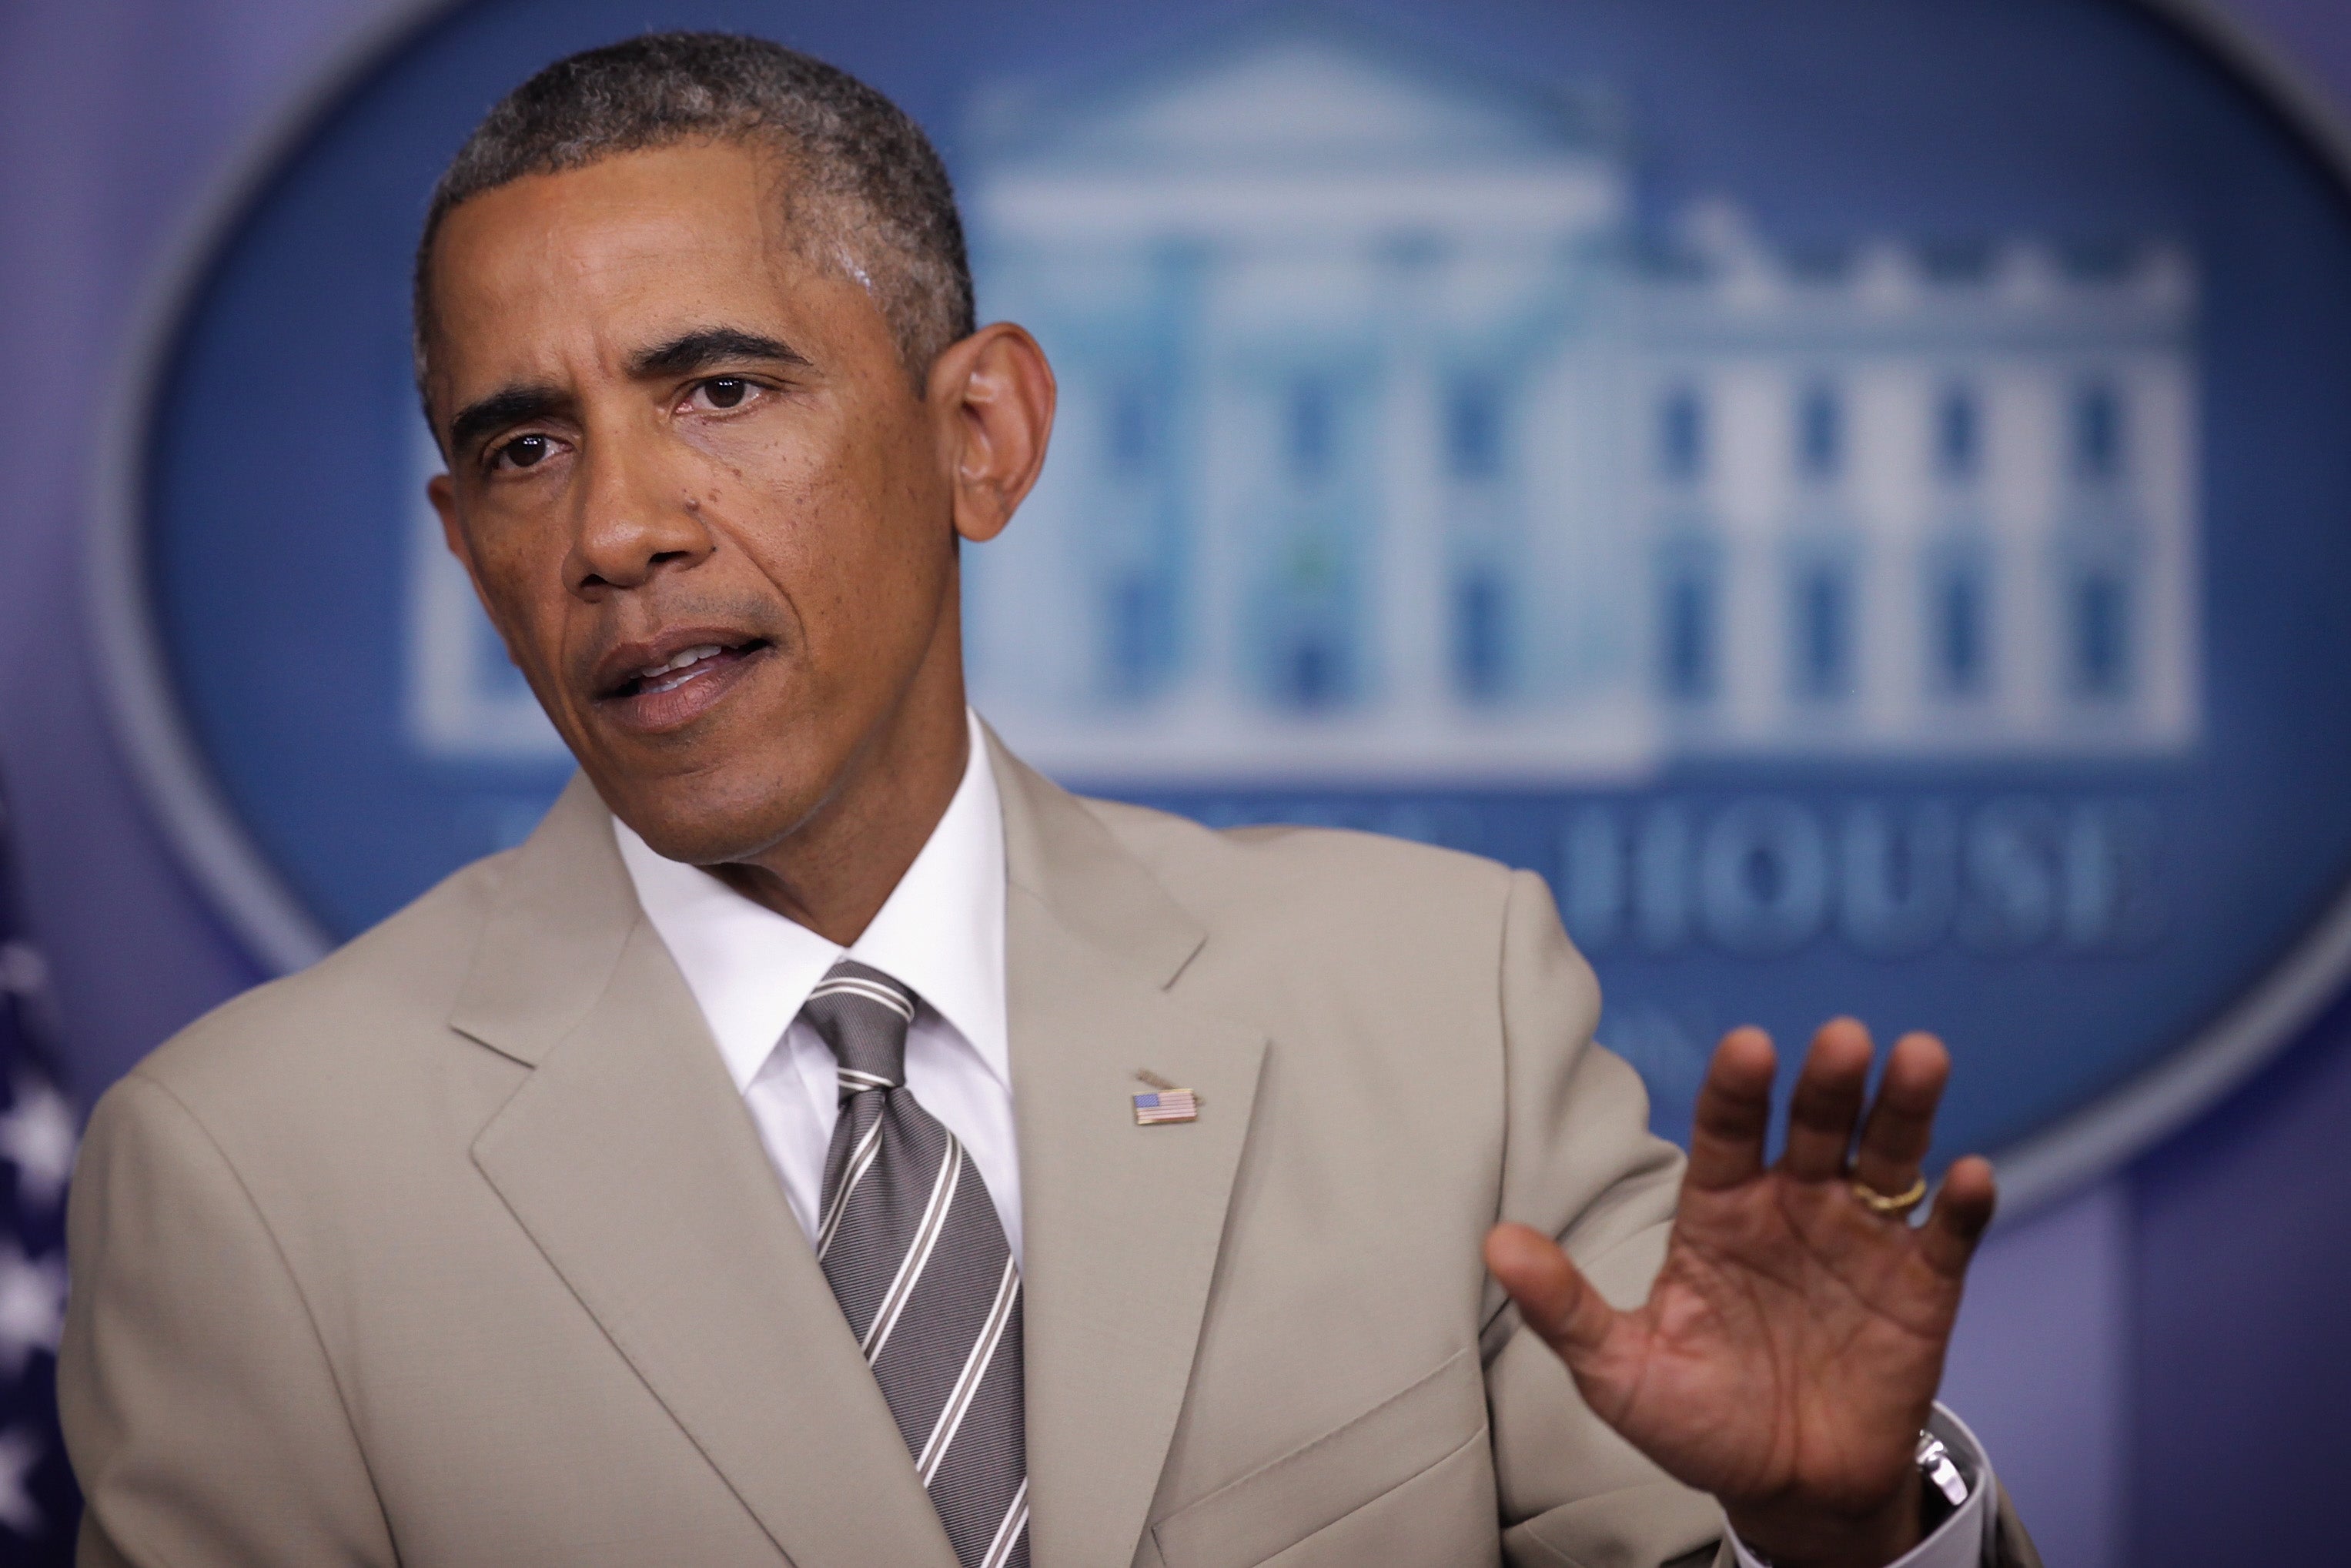 The suit that launched Suitgate